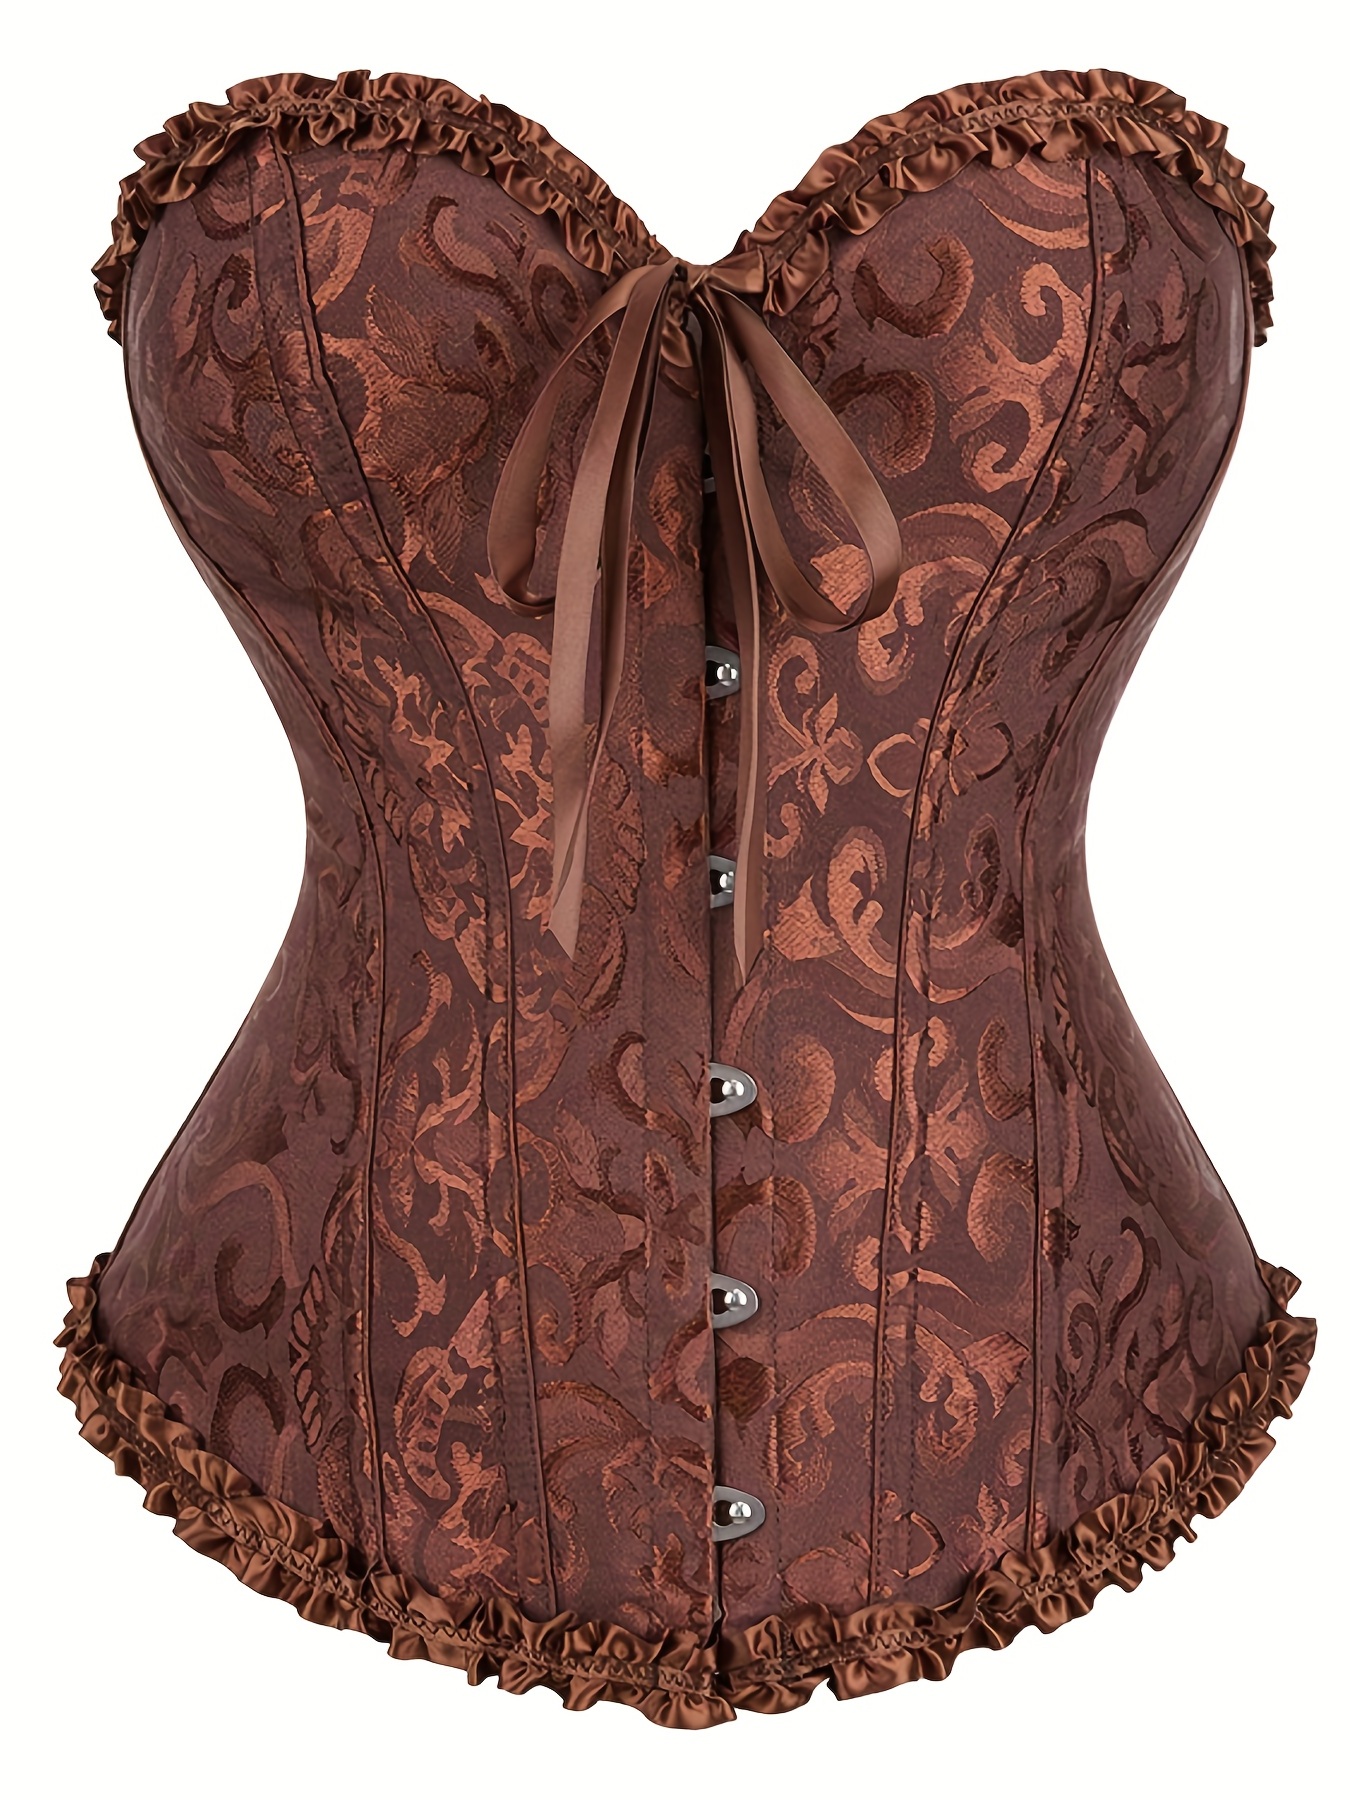 Elegant Floral Lace Brown Waist Cincher Corset For Women Body Shaper,  Girdle, And Extender Streetwear Decorations From Rainbowwo, $9.7